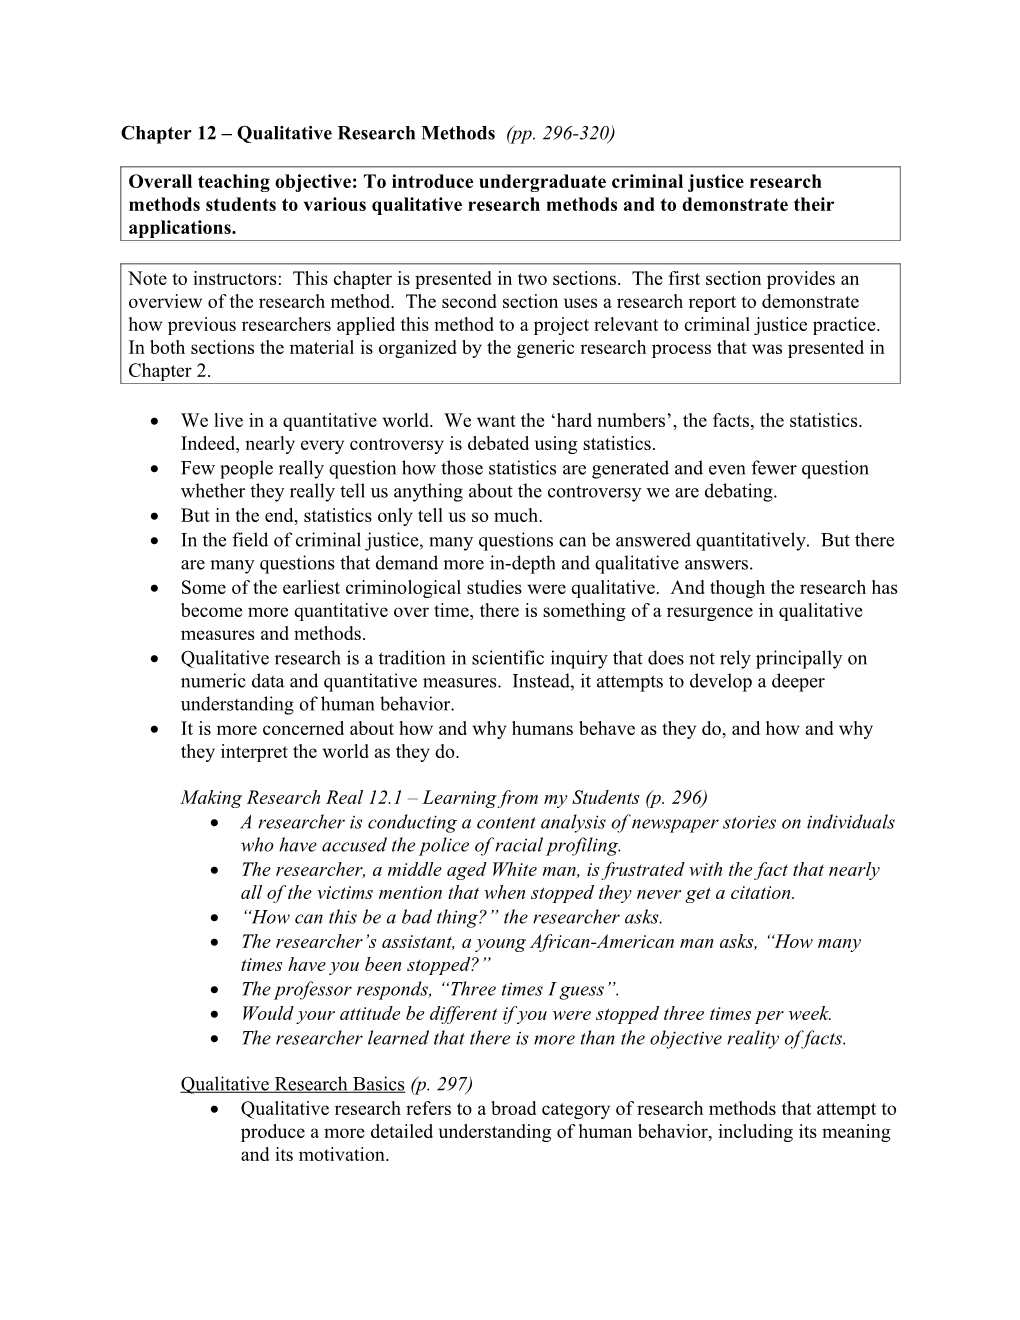 Chapter 12 Qualitative Research Methods (Pp. 296-320)